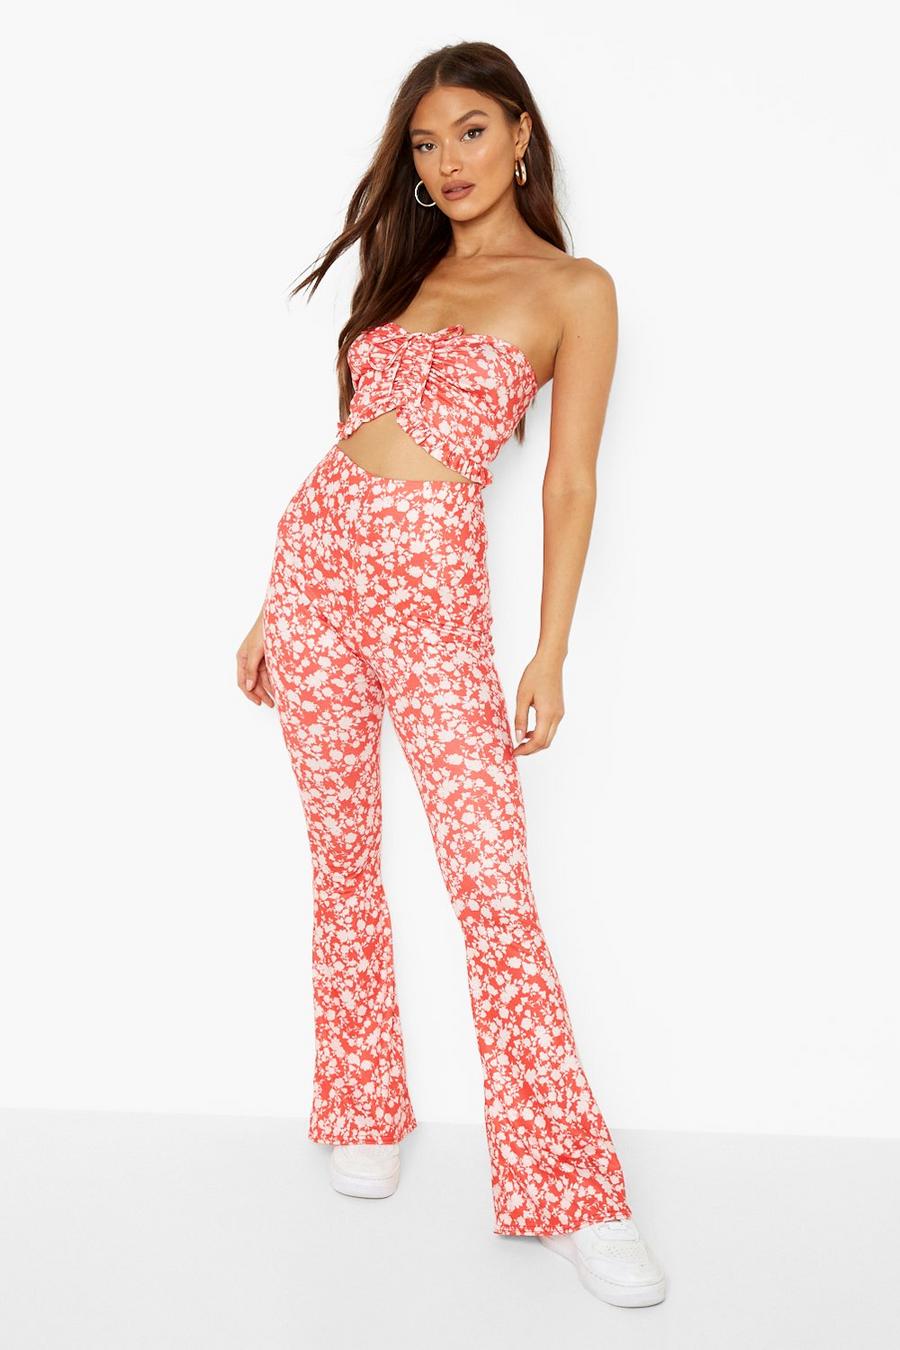 Red Floral Bralettete & Flared Pants